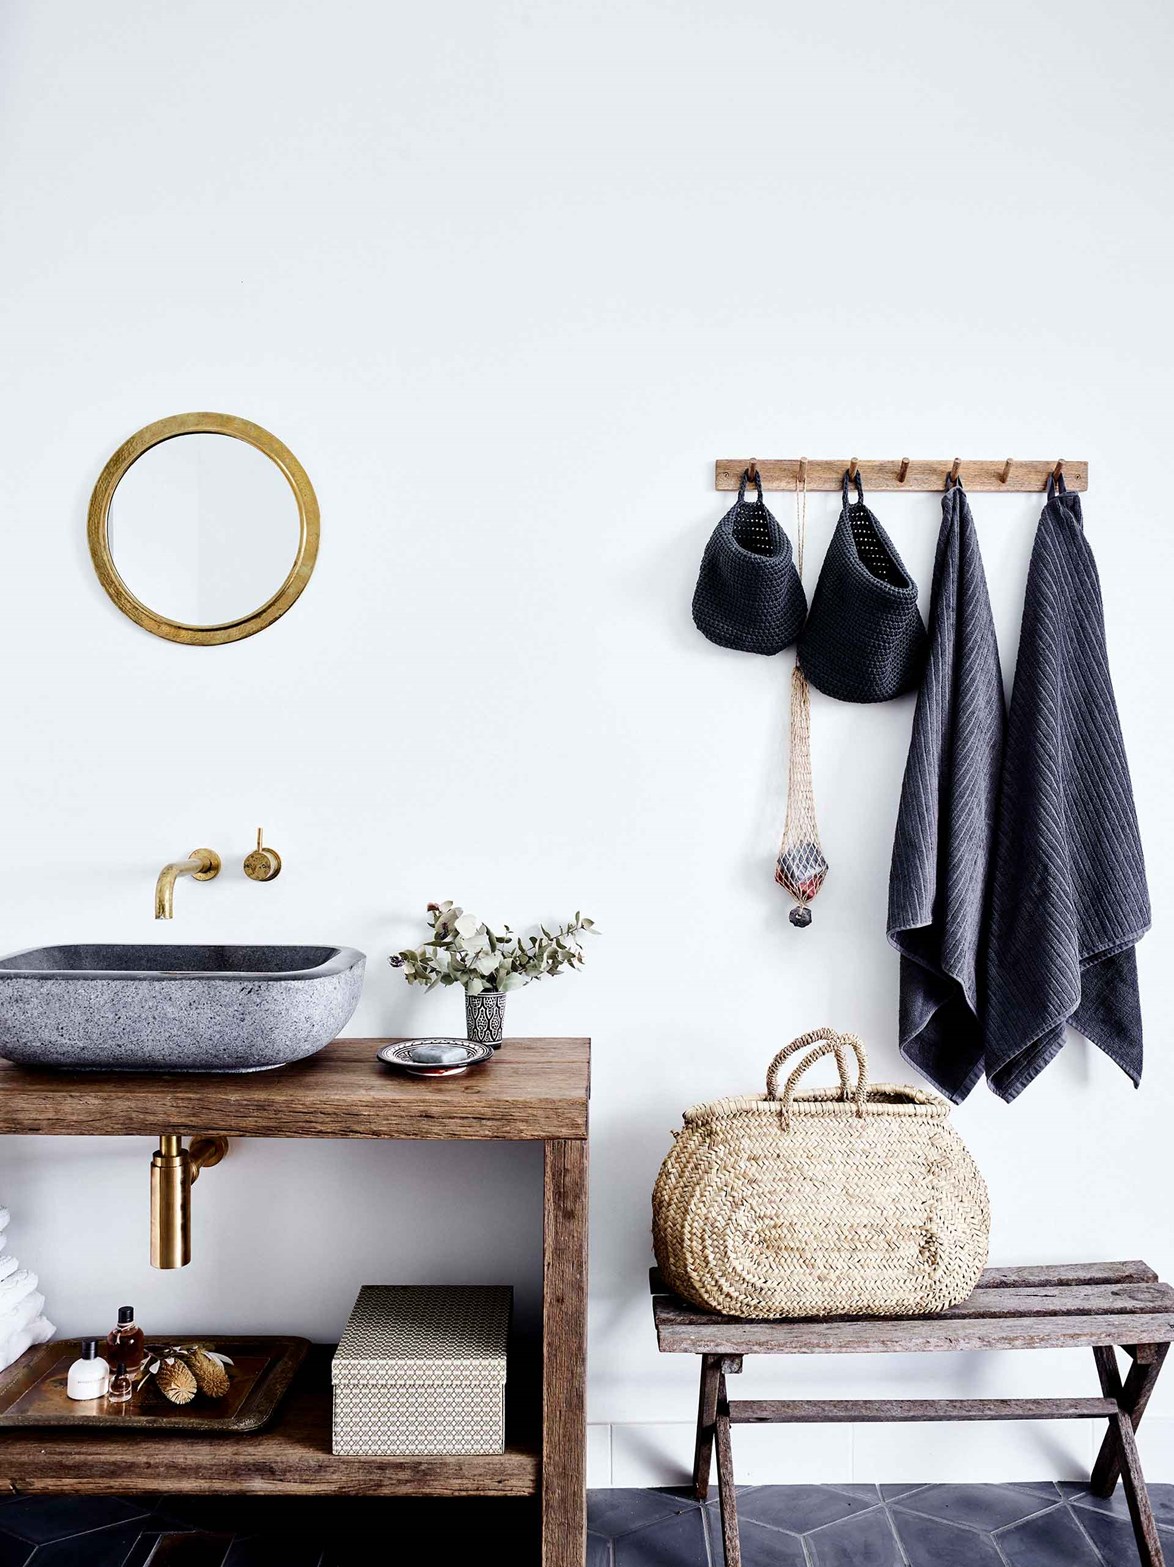 A custom-made recycled timber vanity paired with a concrete sink and brass tapware gives the bathroom a rustic minimalist aesthetic to tie in with the rest of this [Danish-inspired cabin](https://www.homestolove.com.au/small-modern-cabin-20503|target="_blank").